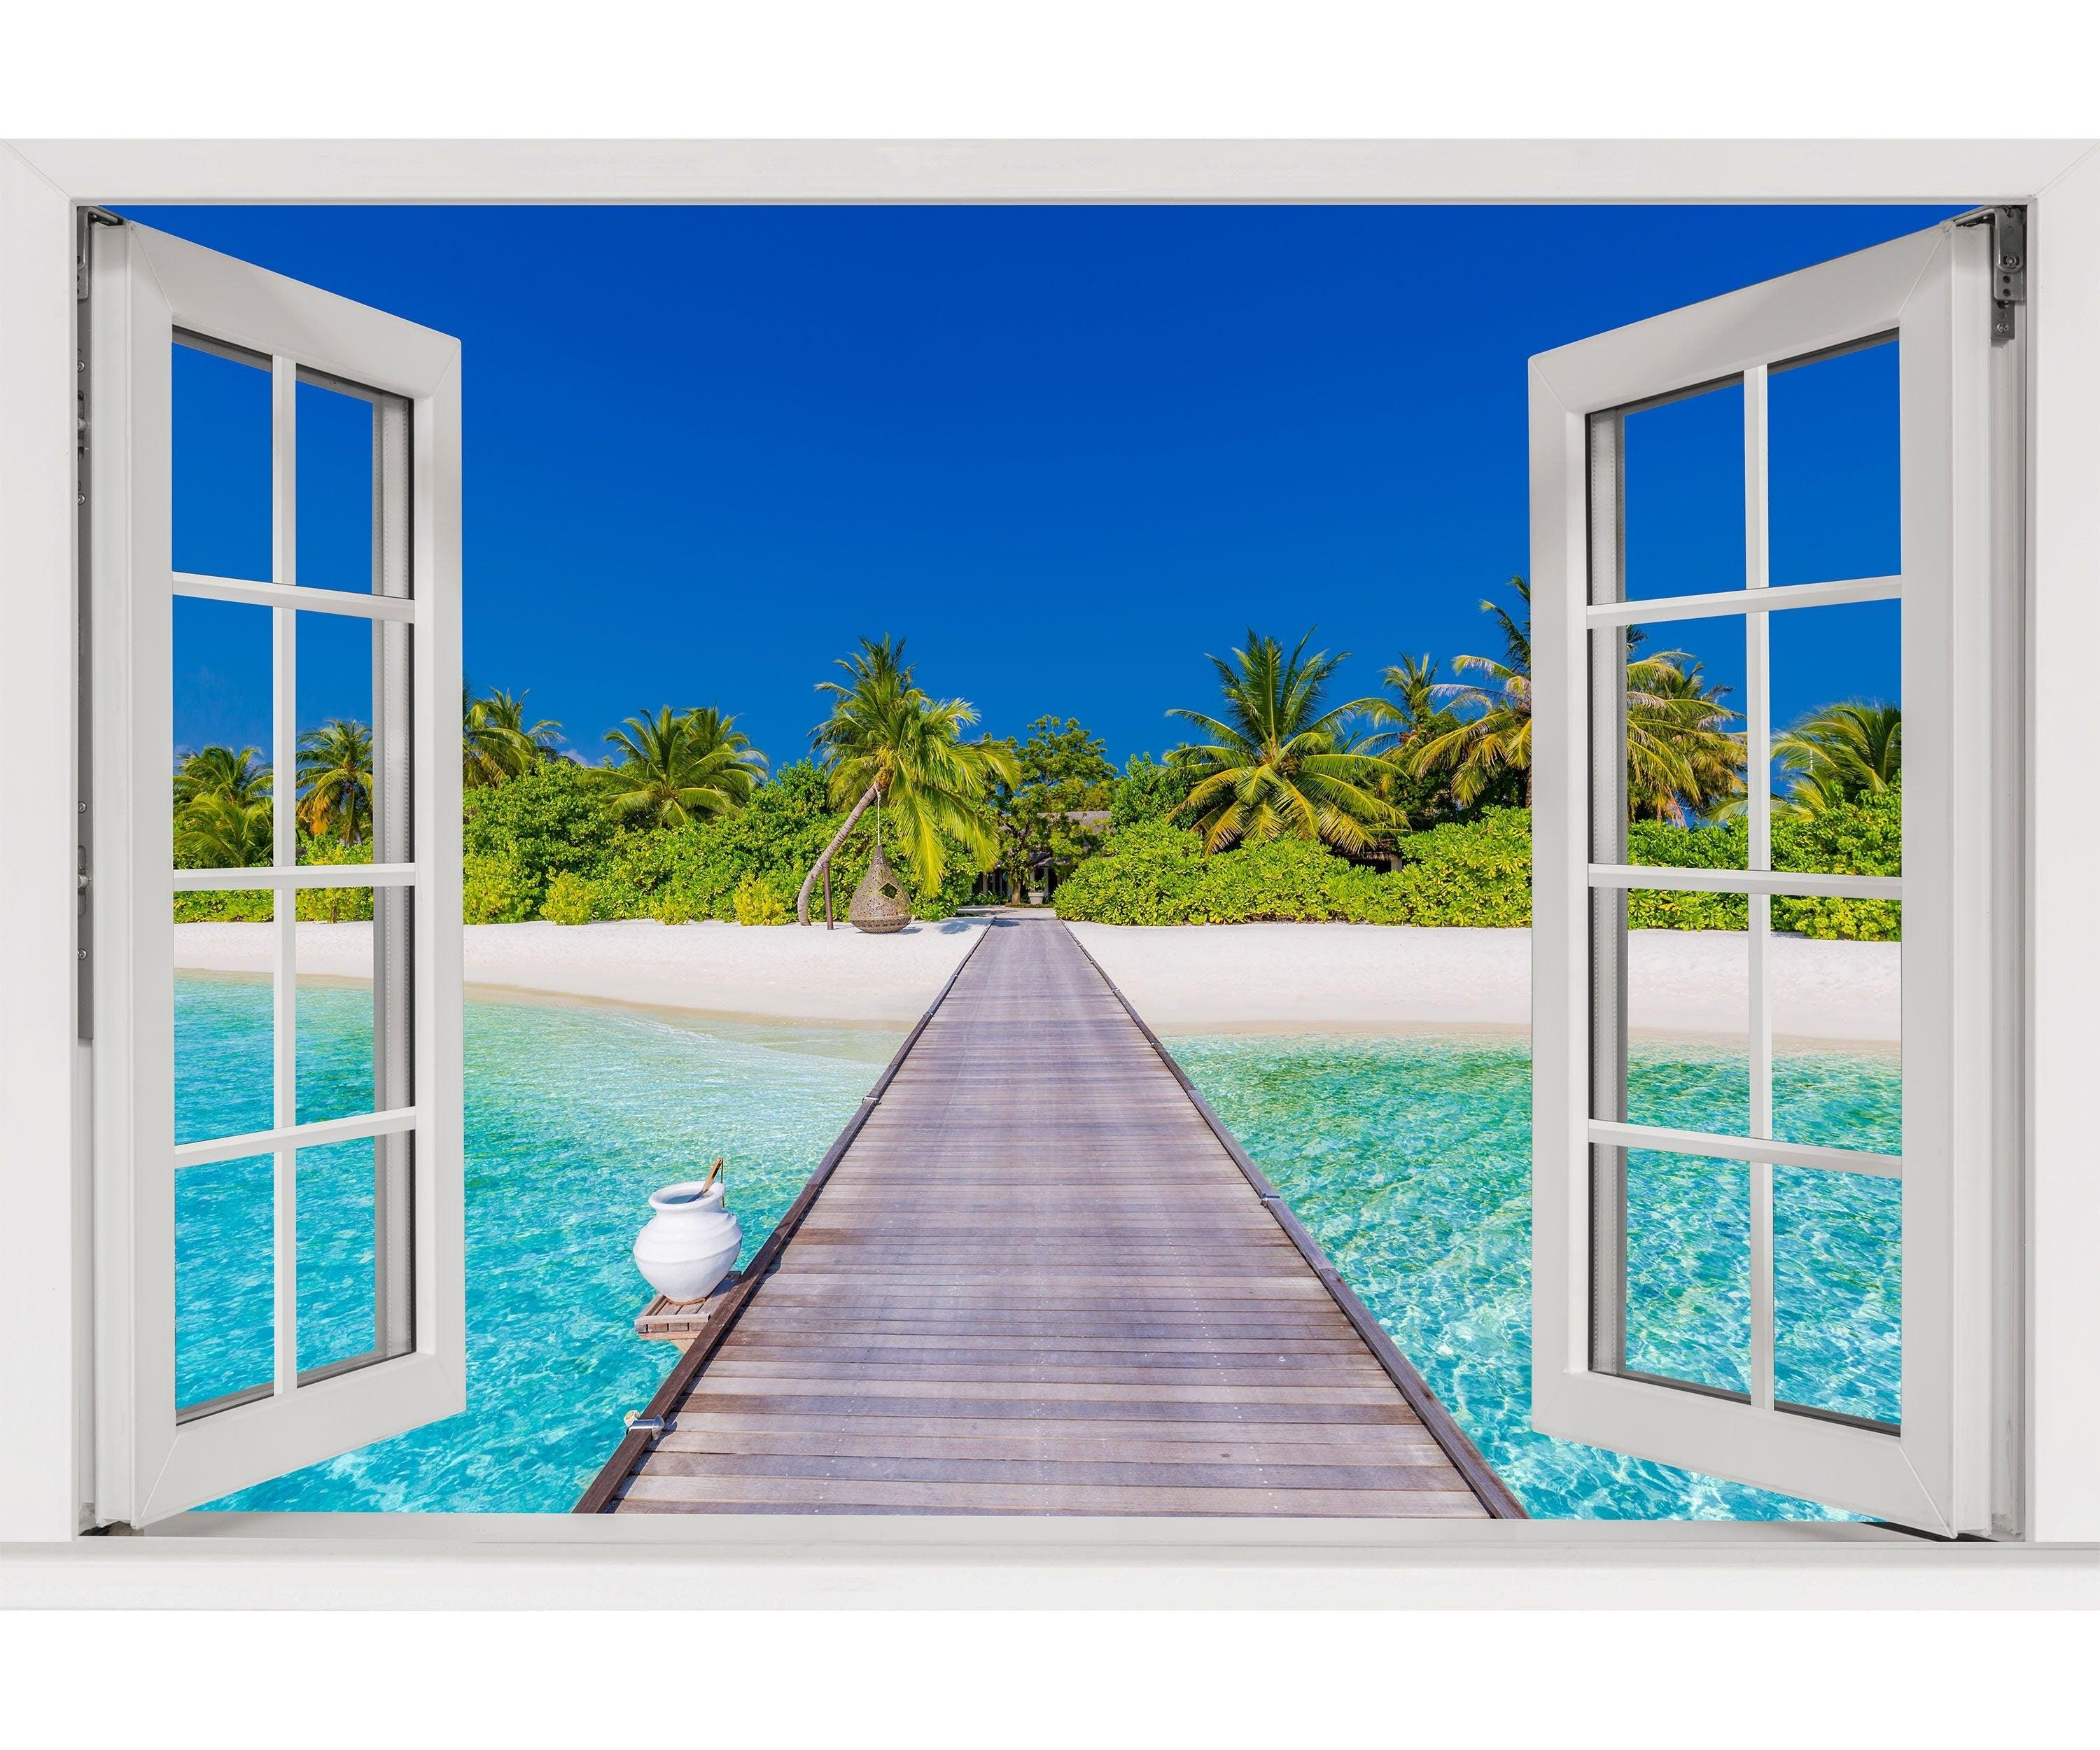 Window Scape Tropical #1 Window Decal Sticker Mural Beach Removable Fabric Window Frame Office Bedroom 3D